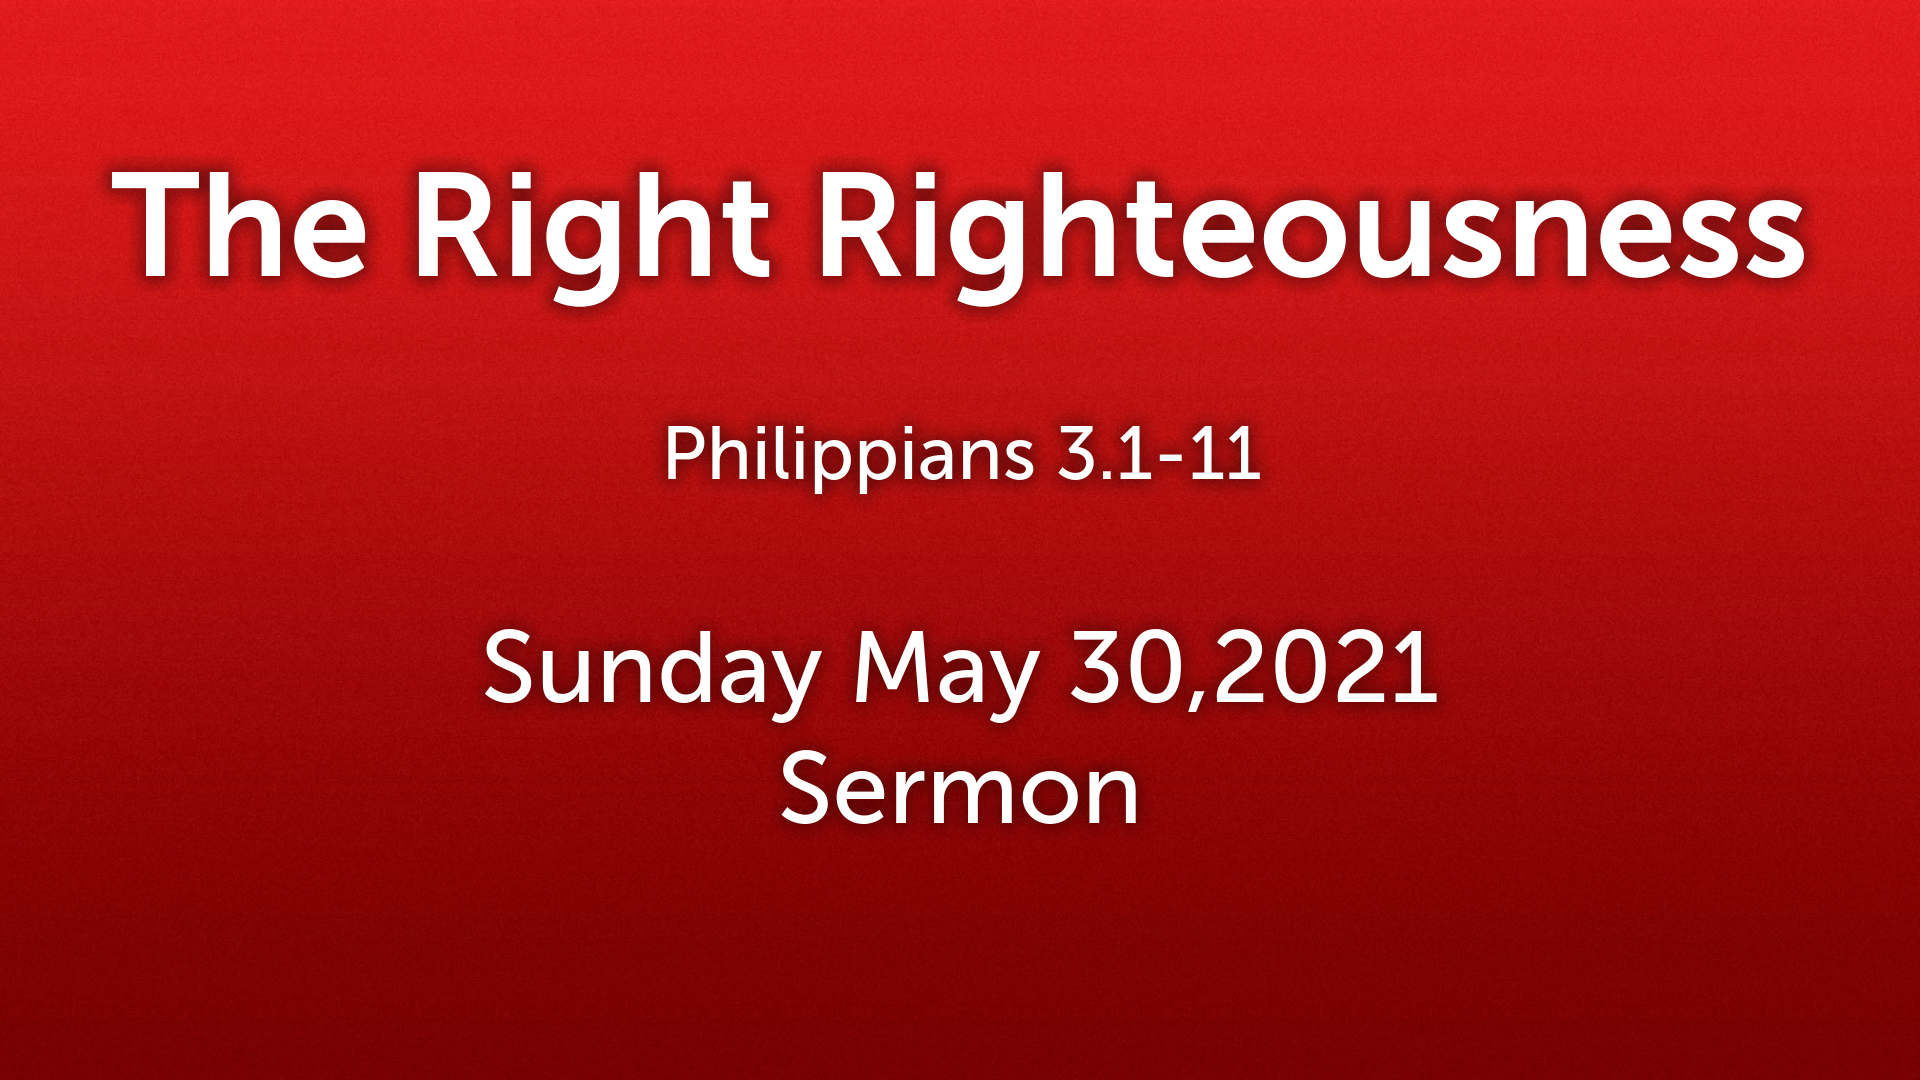 The Right Righteousness